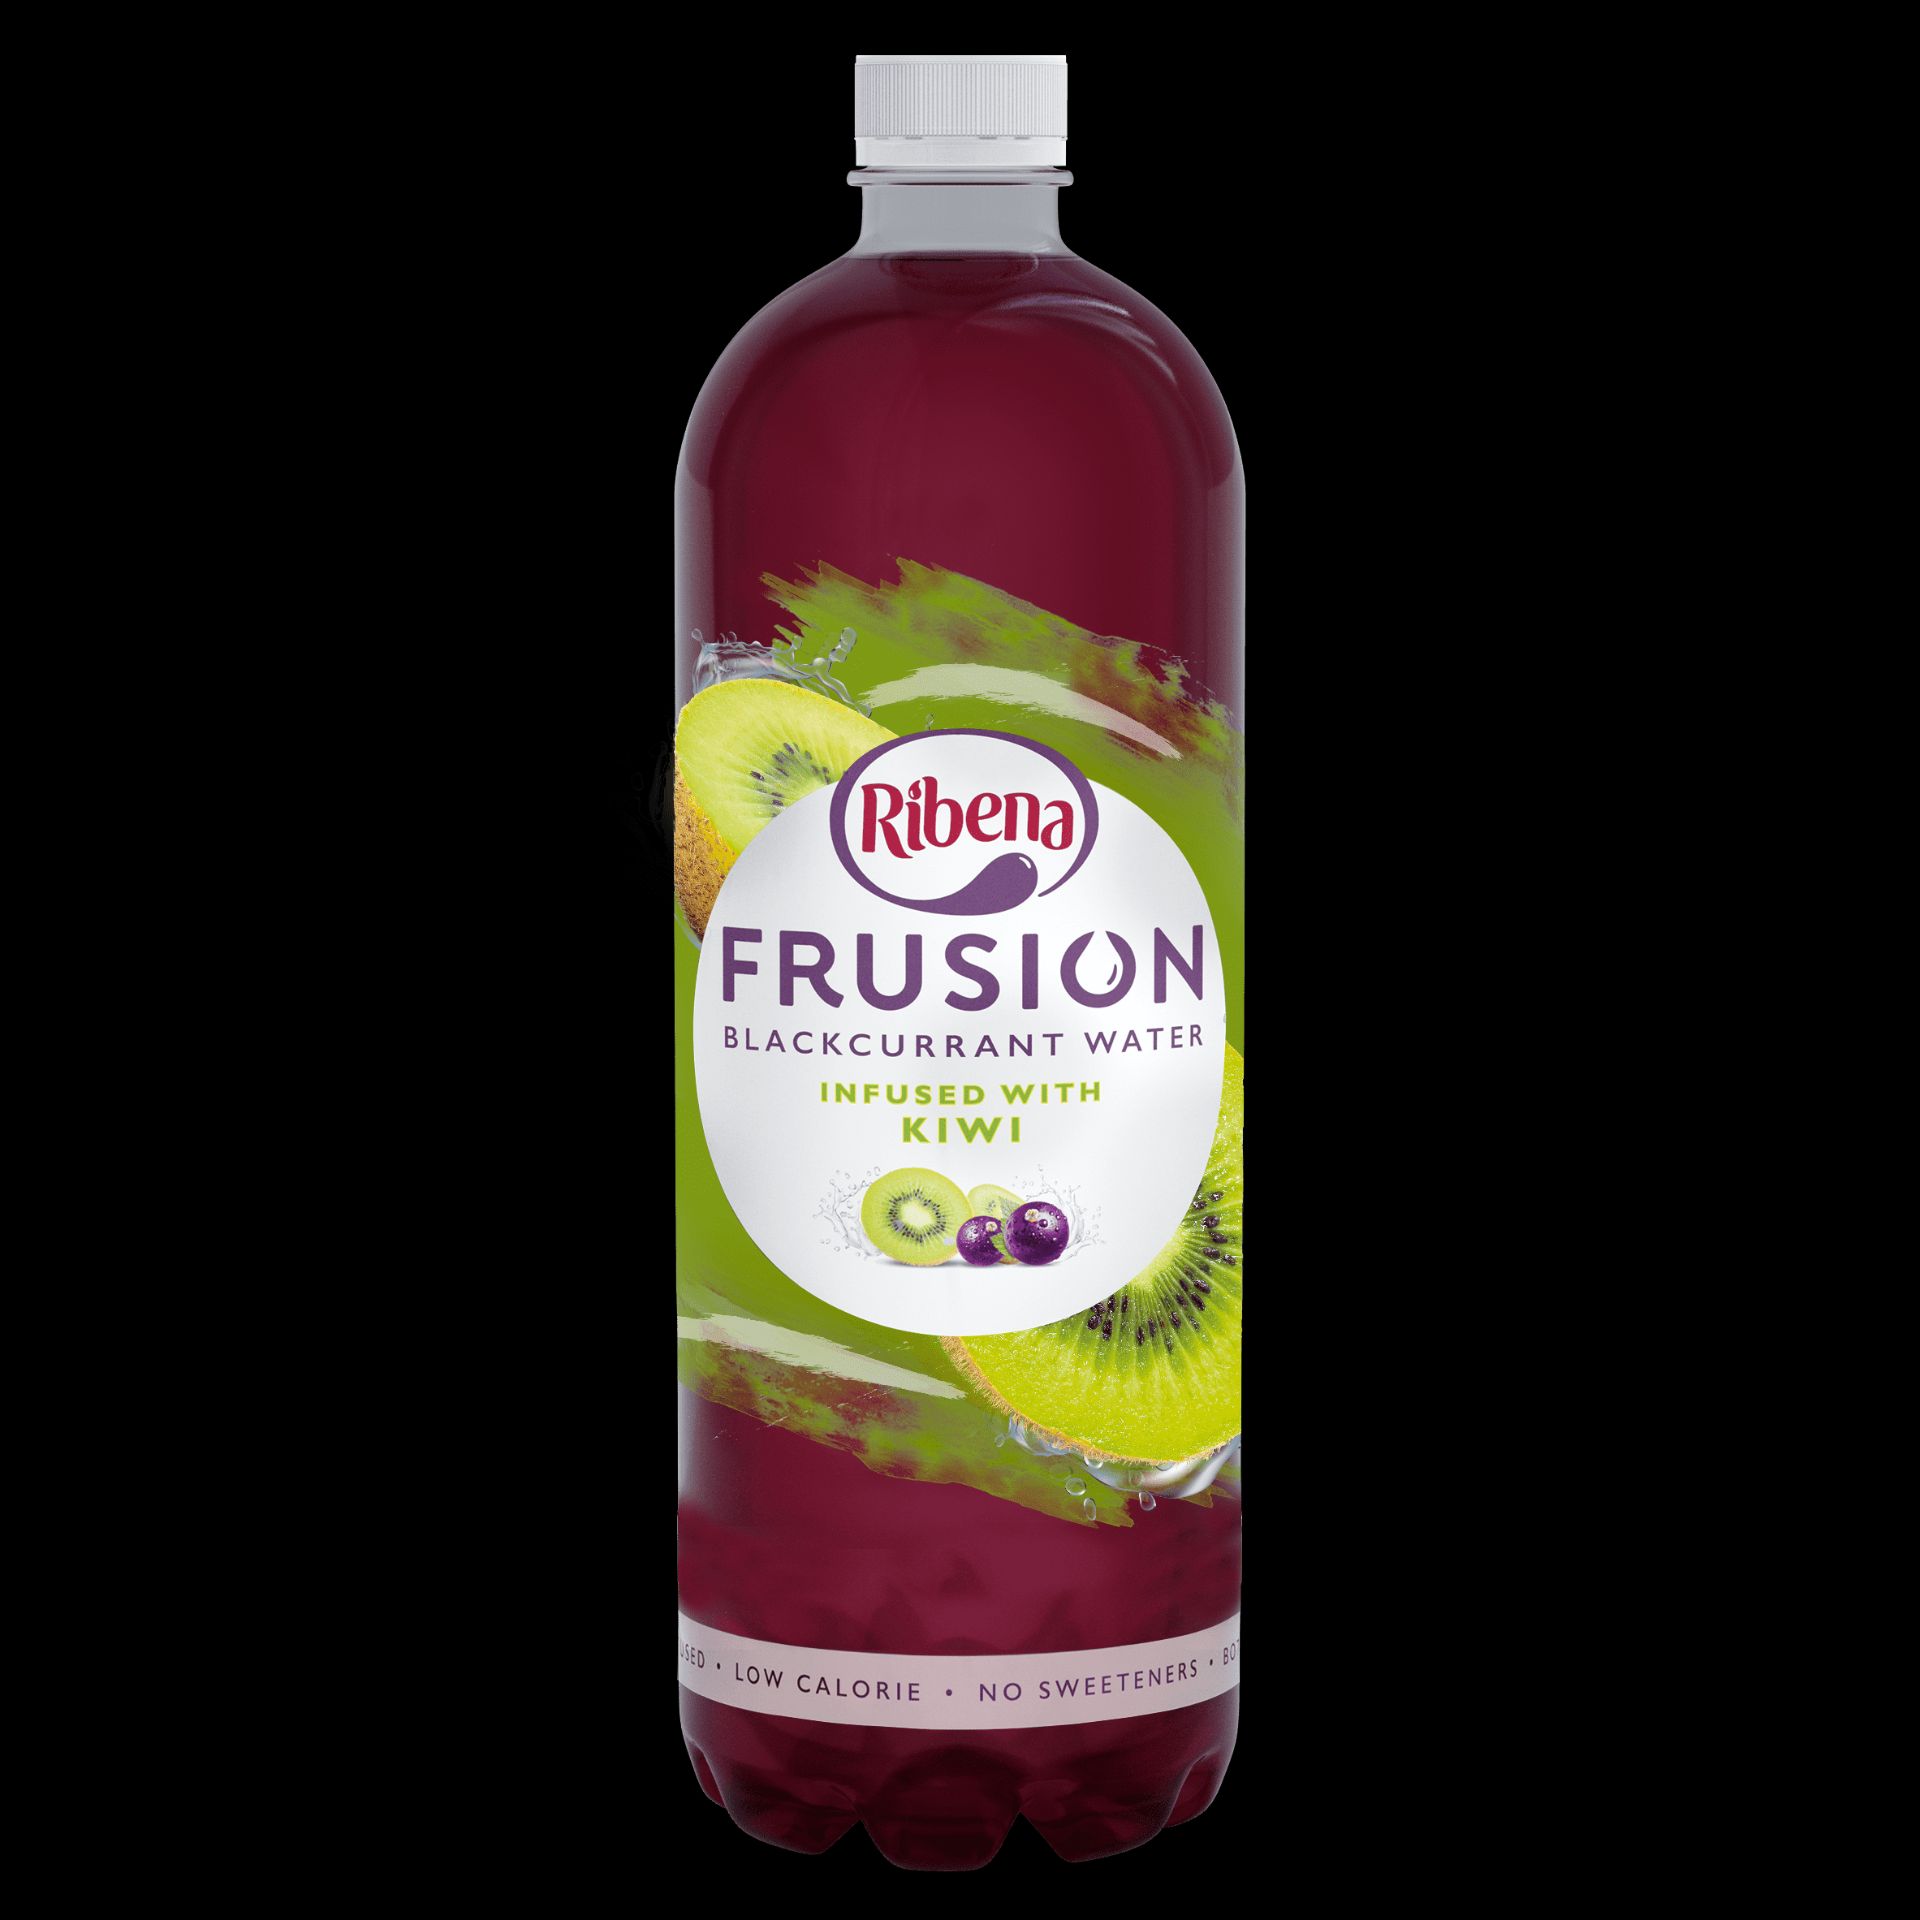 + VAT Brand New Large Pallet Containing Approx 1800 1Ltr Bottles of Ribena Frusion Blackcurrent